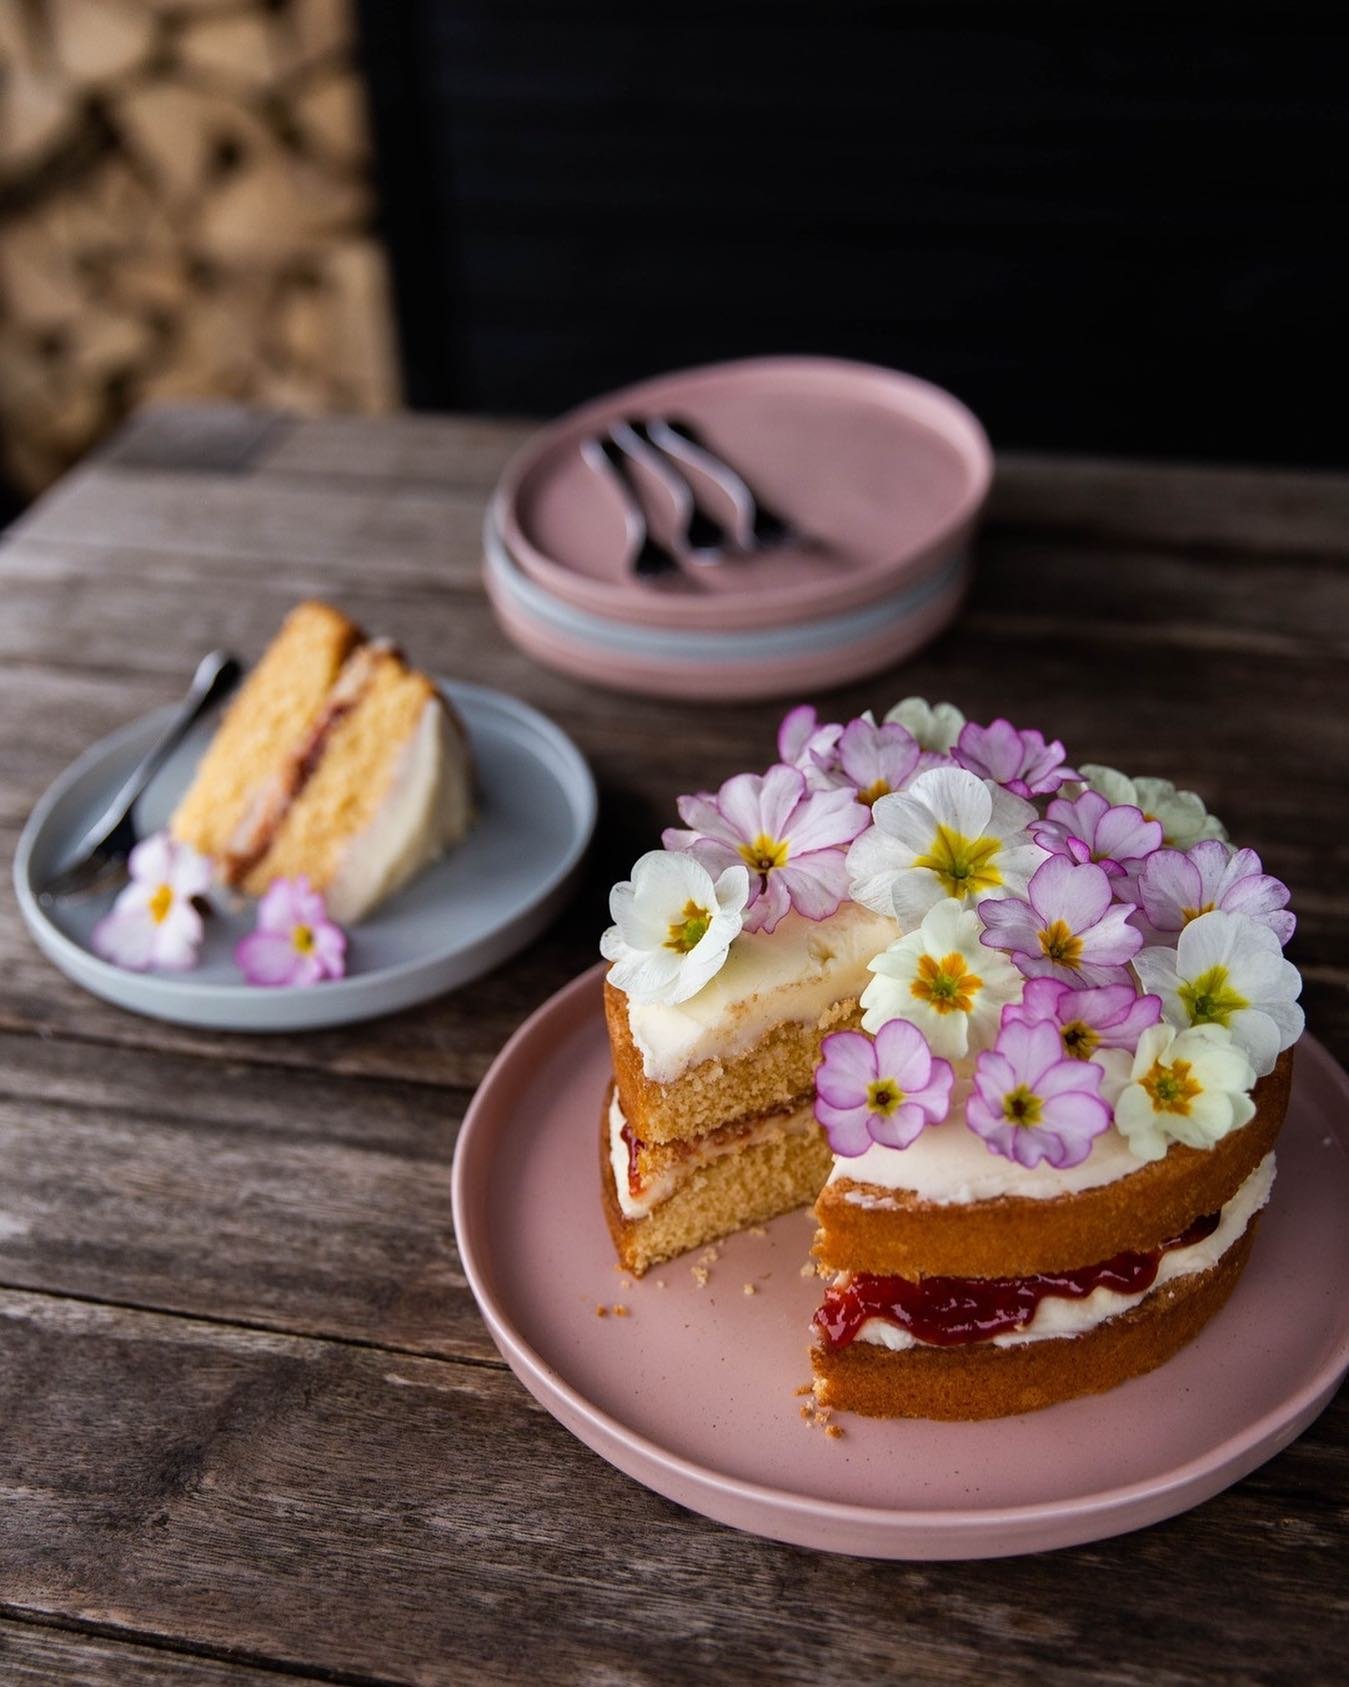 I&rsquo;ve long been a fan of edible flowers and have been known to sneak them into everything possible &ndash; from cakes and ice cubes to salads and ice cream! There is so much in bloom at this time of year that is edible and it&rsquo;s such a love